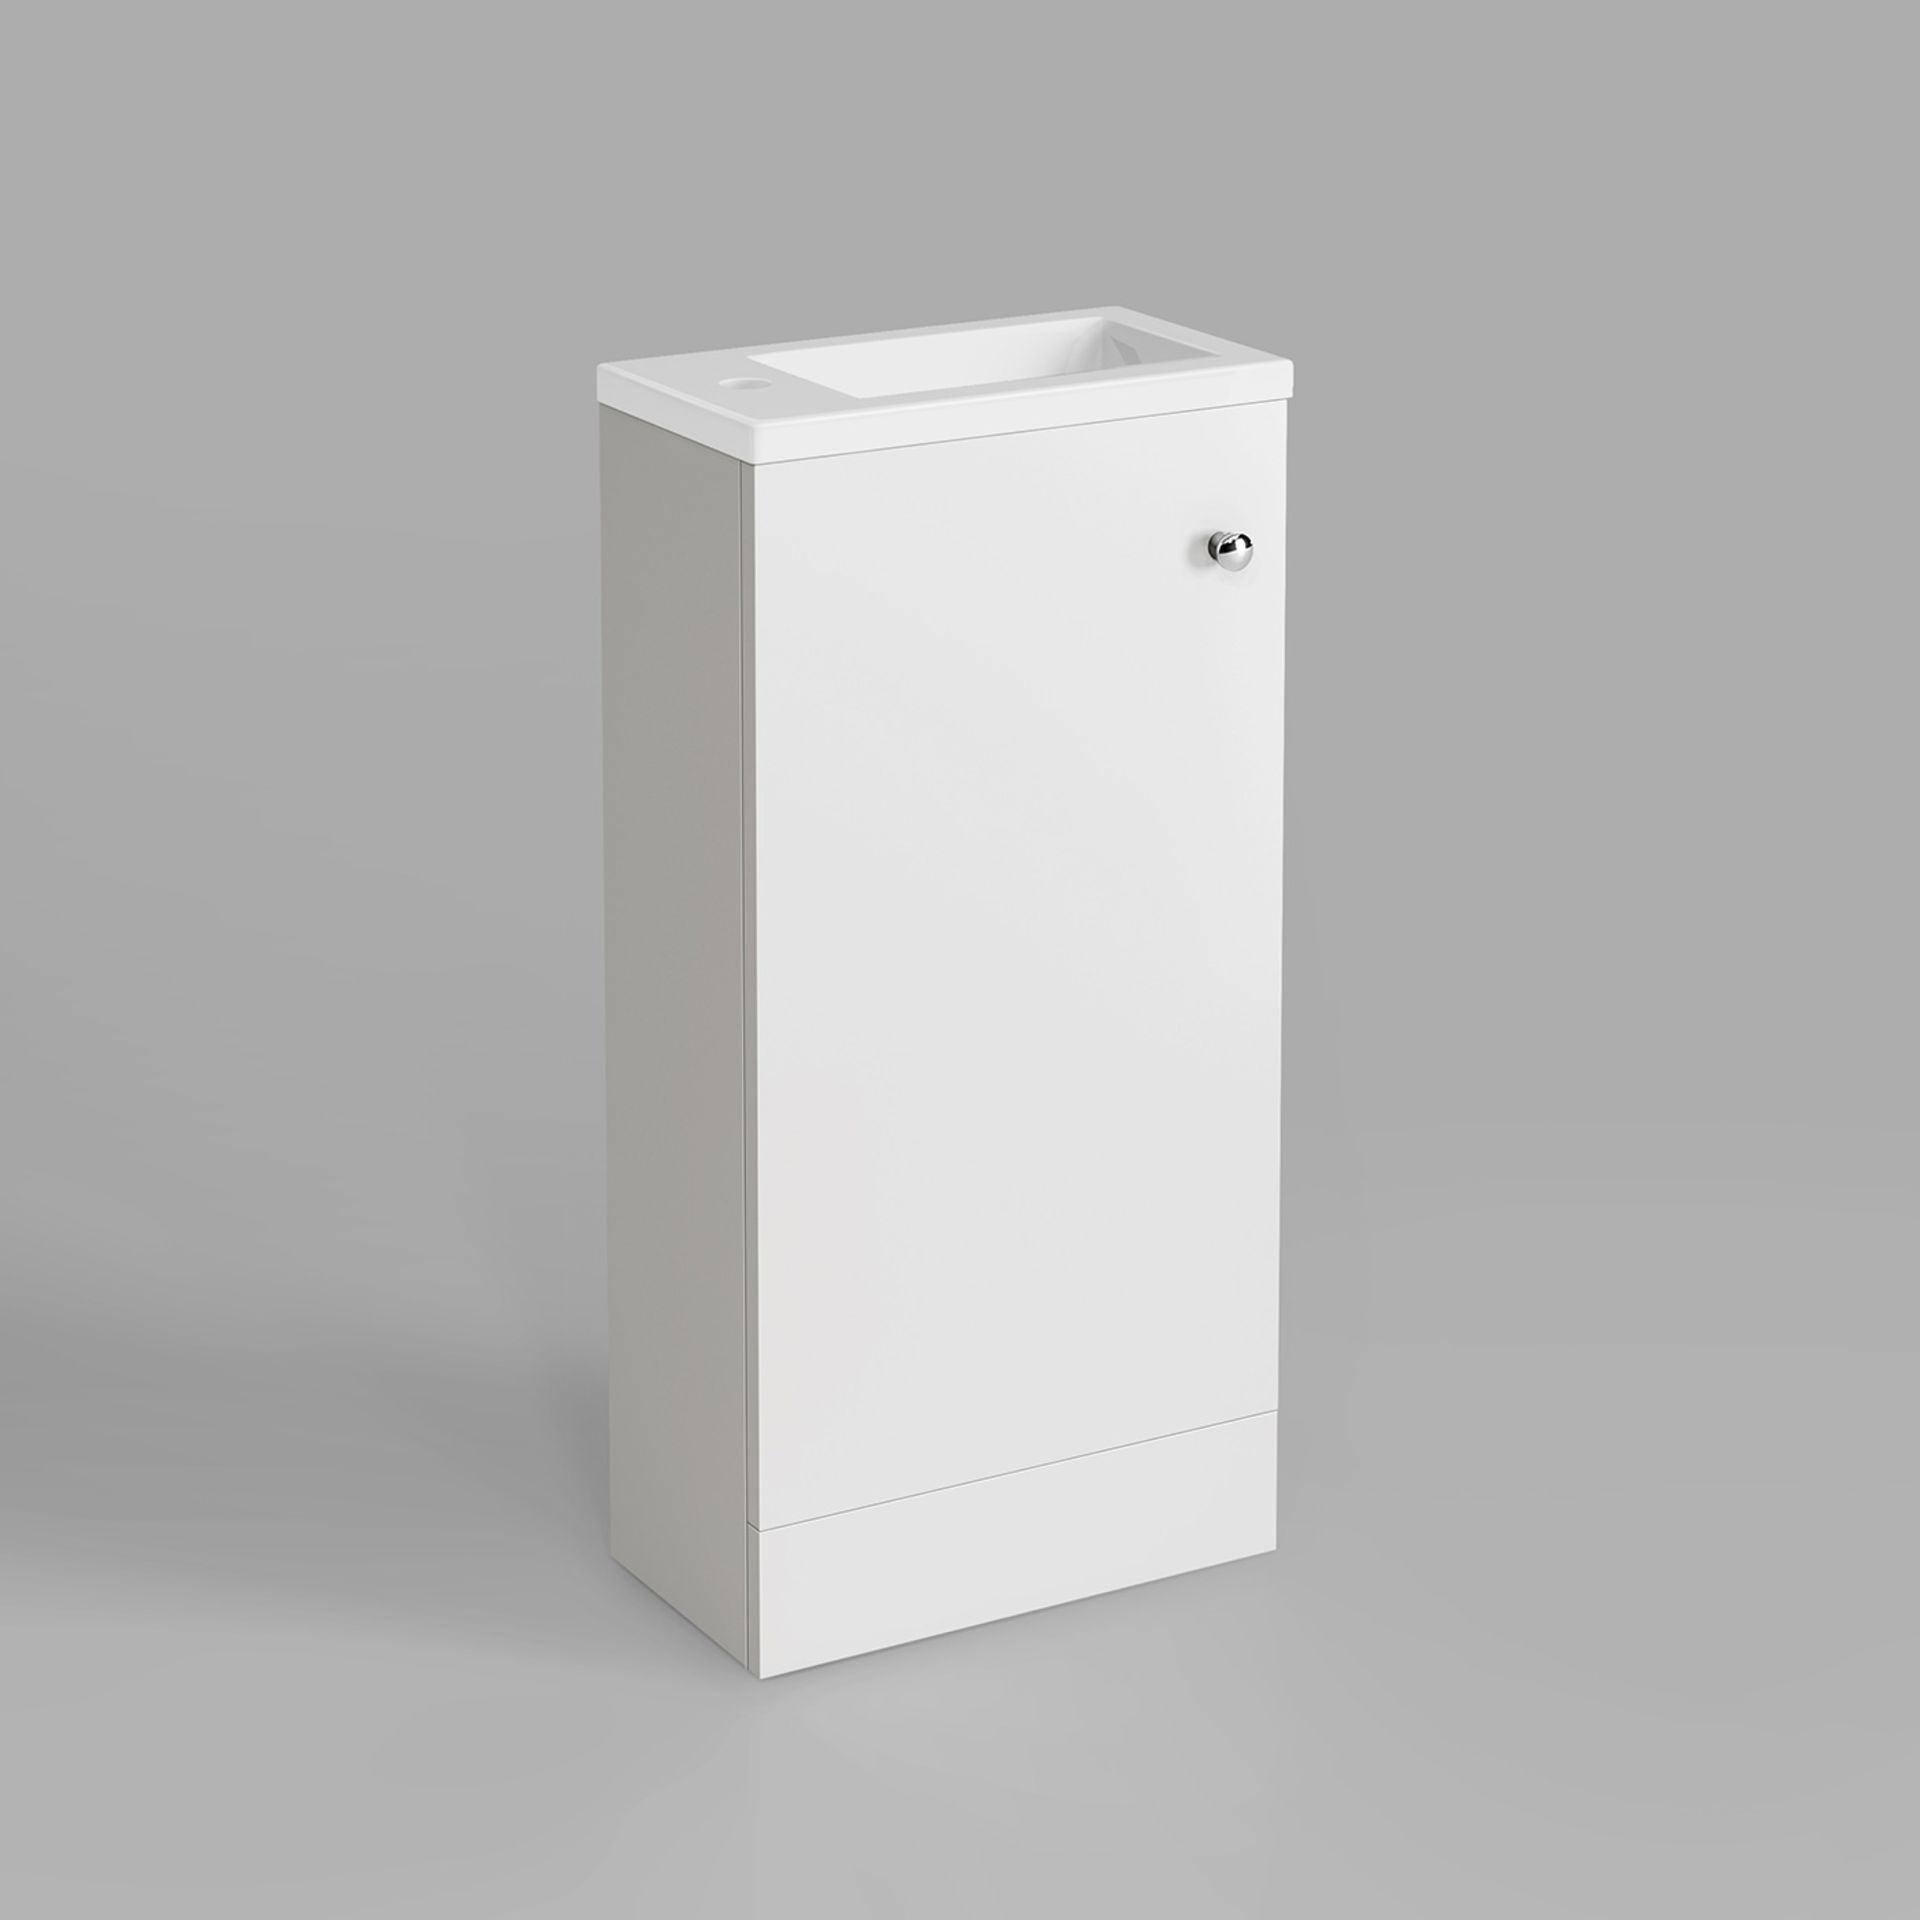 PALLET OF 10 x 400mm Blanc Matte White Basin Unit - Floor Standing. RRP £199.99 each, giving this - Image 4 of 5